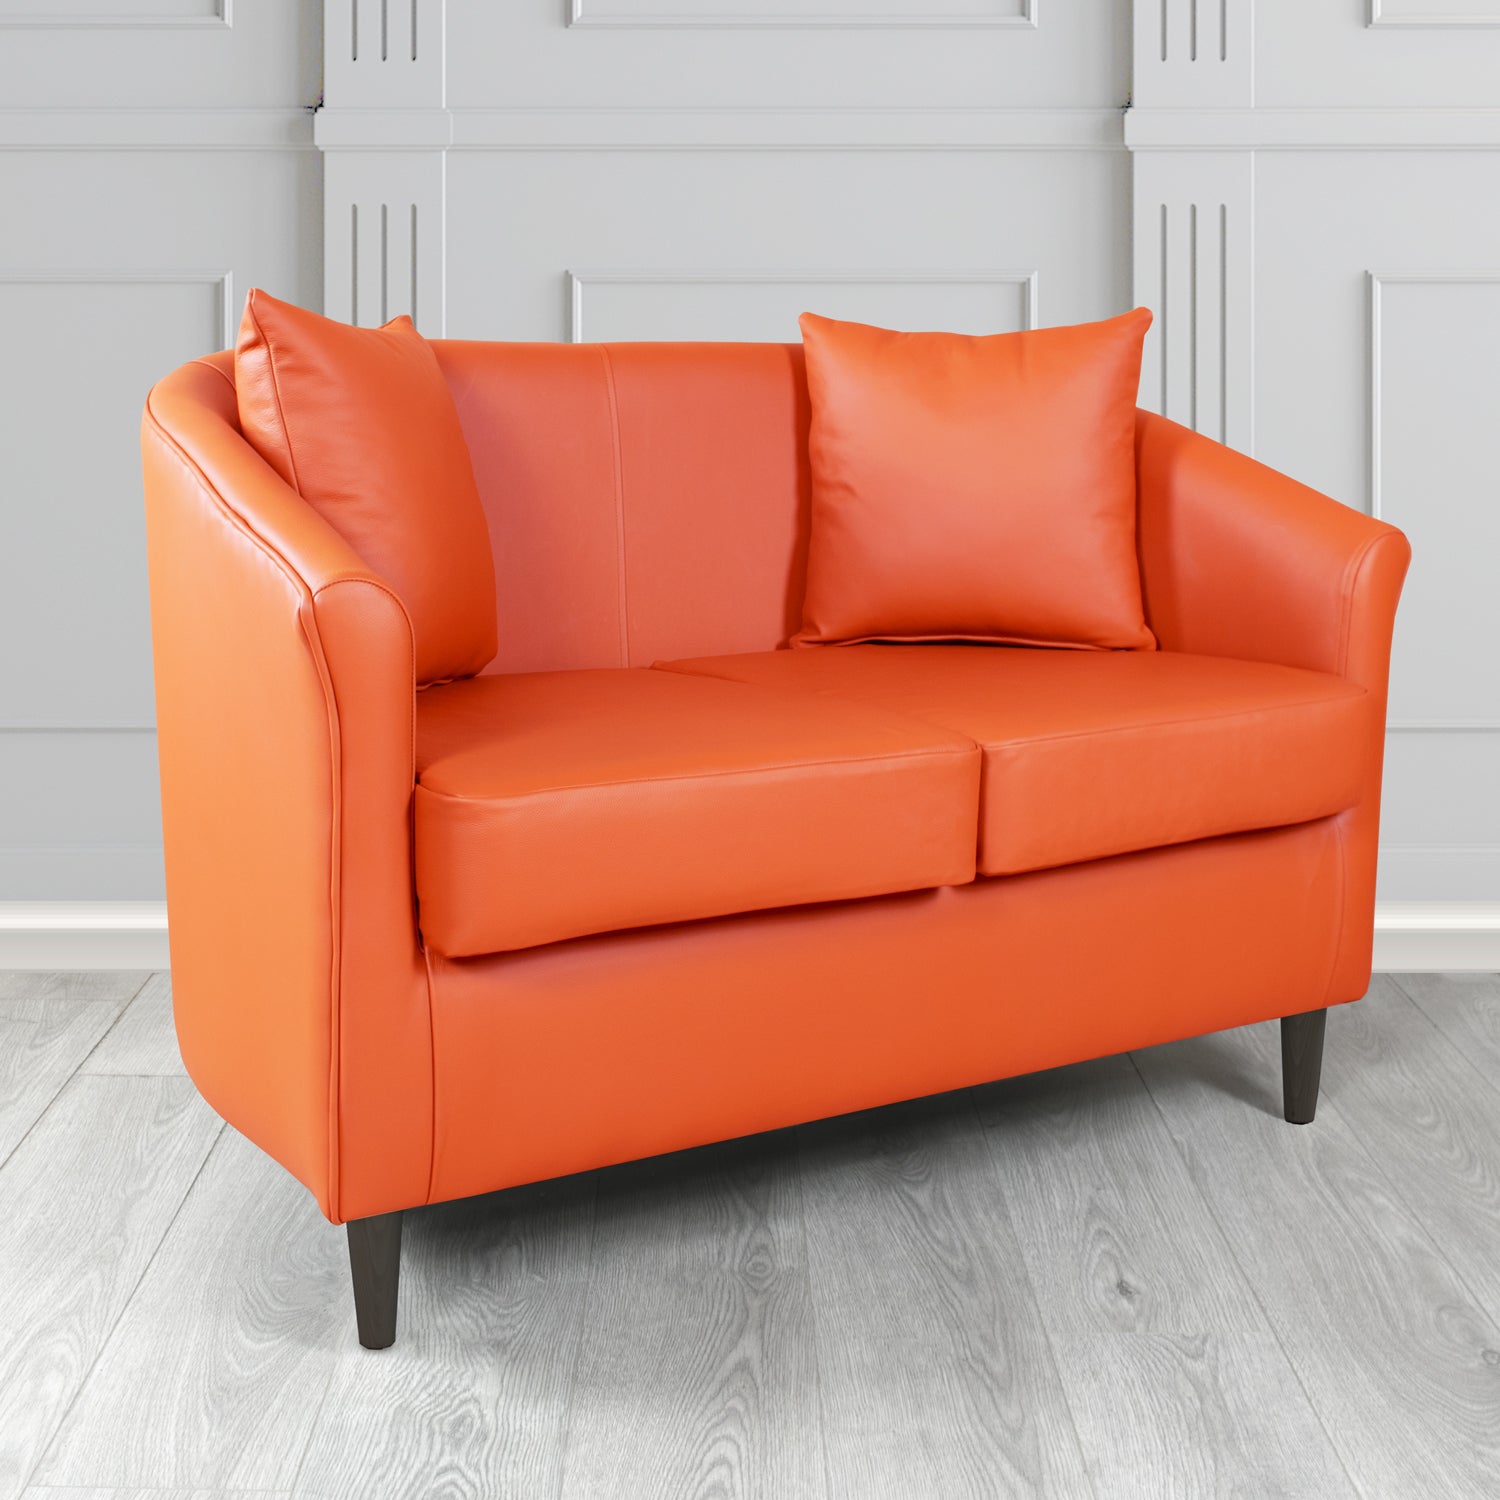 St Tropez Shelly Firestone Crib 5 Genuine Leather 2 Seater Tub Sofa with Scatter Cushions - The Tub Chair Shop